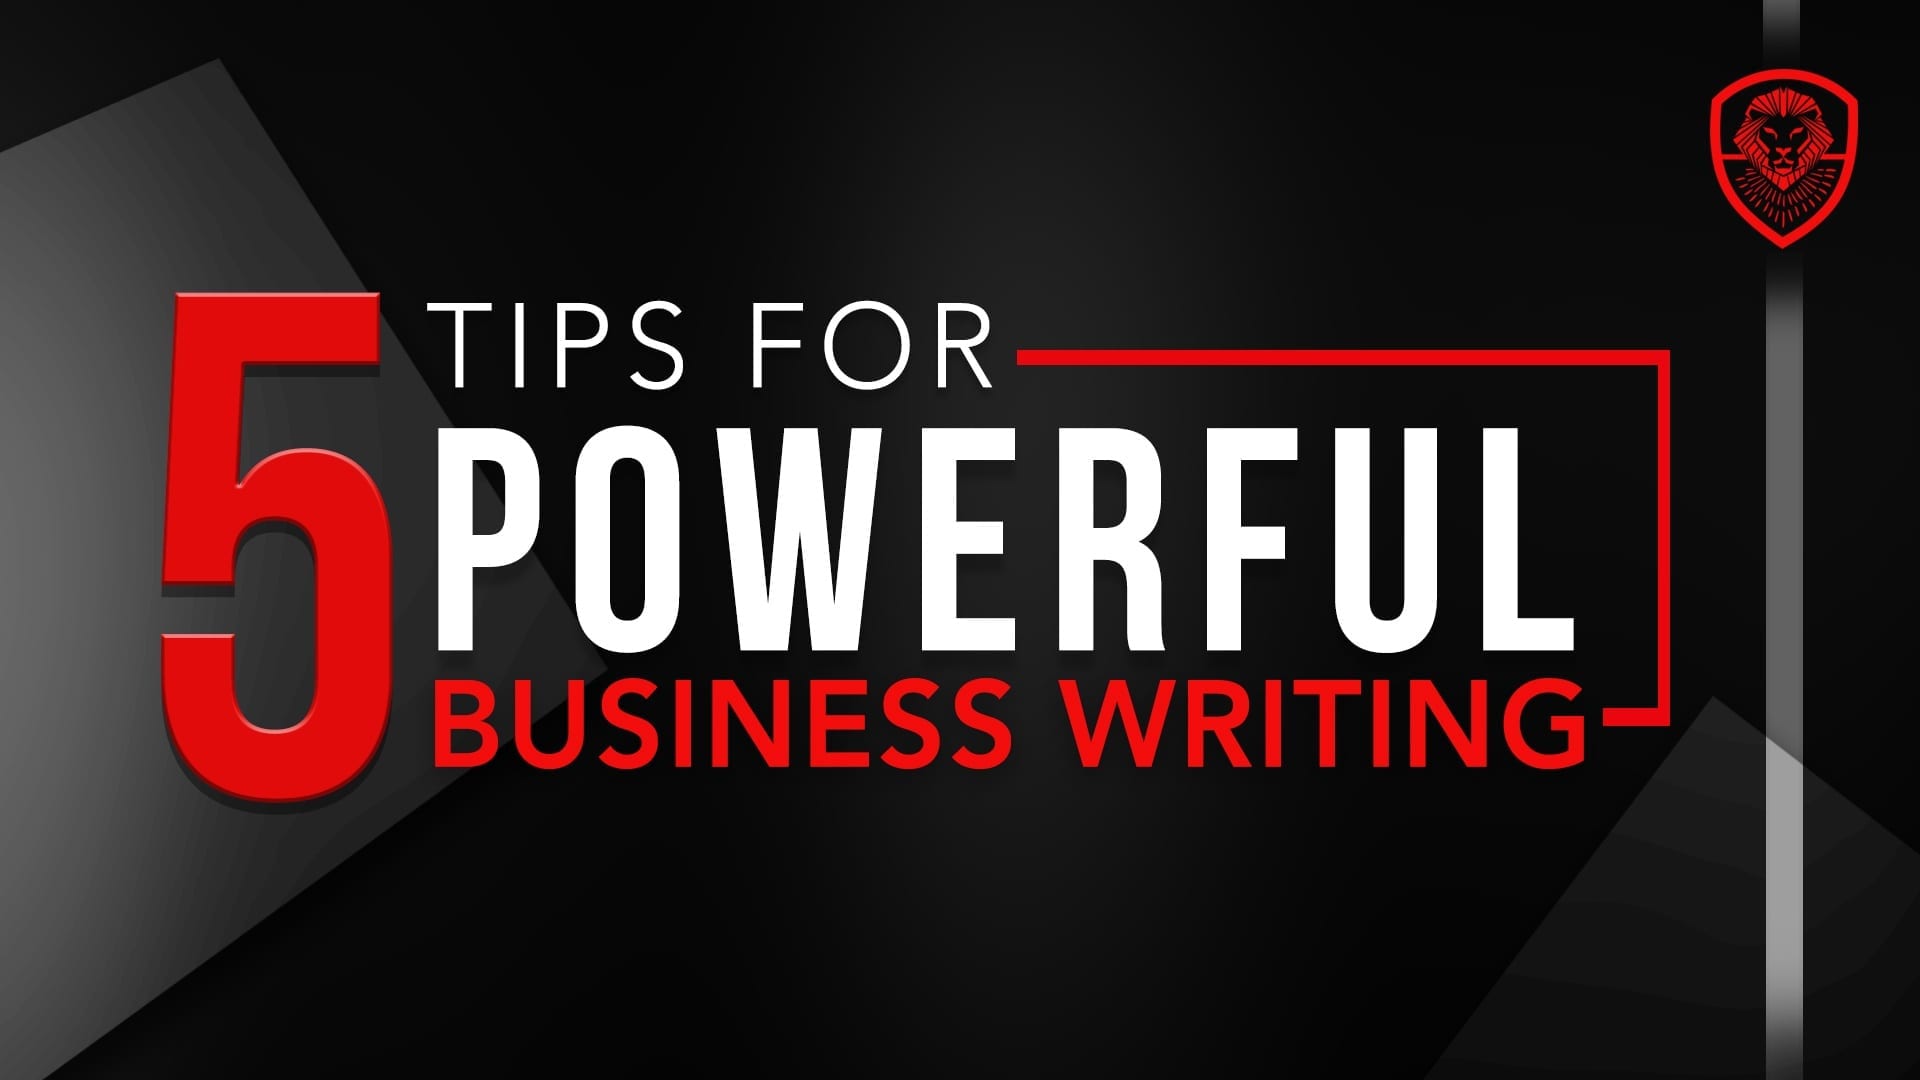 As an entrepreneur, you may not consider business writing to be a top focus. But like it or not, you write every day. Here's how to do it well.